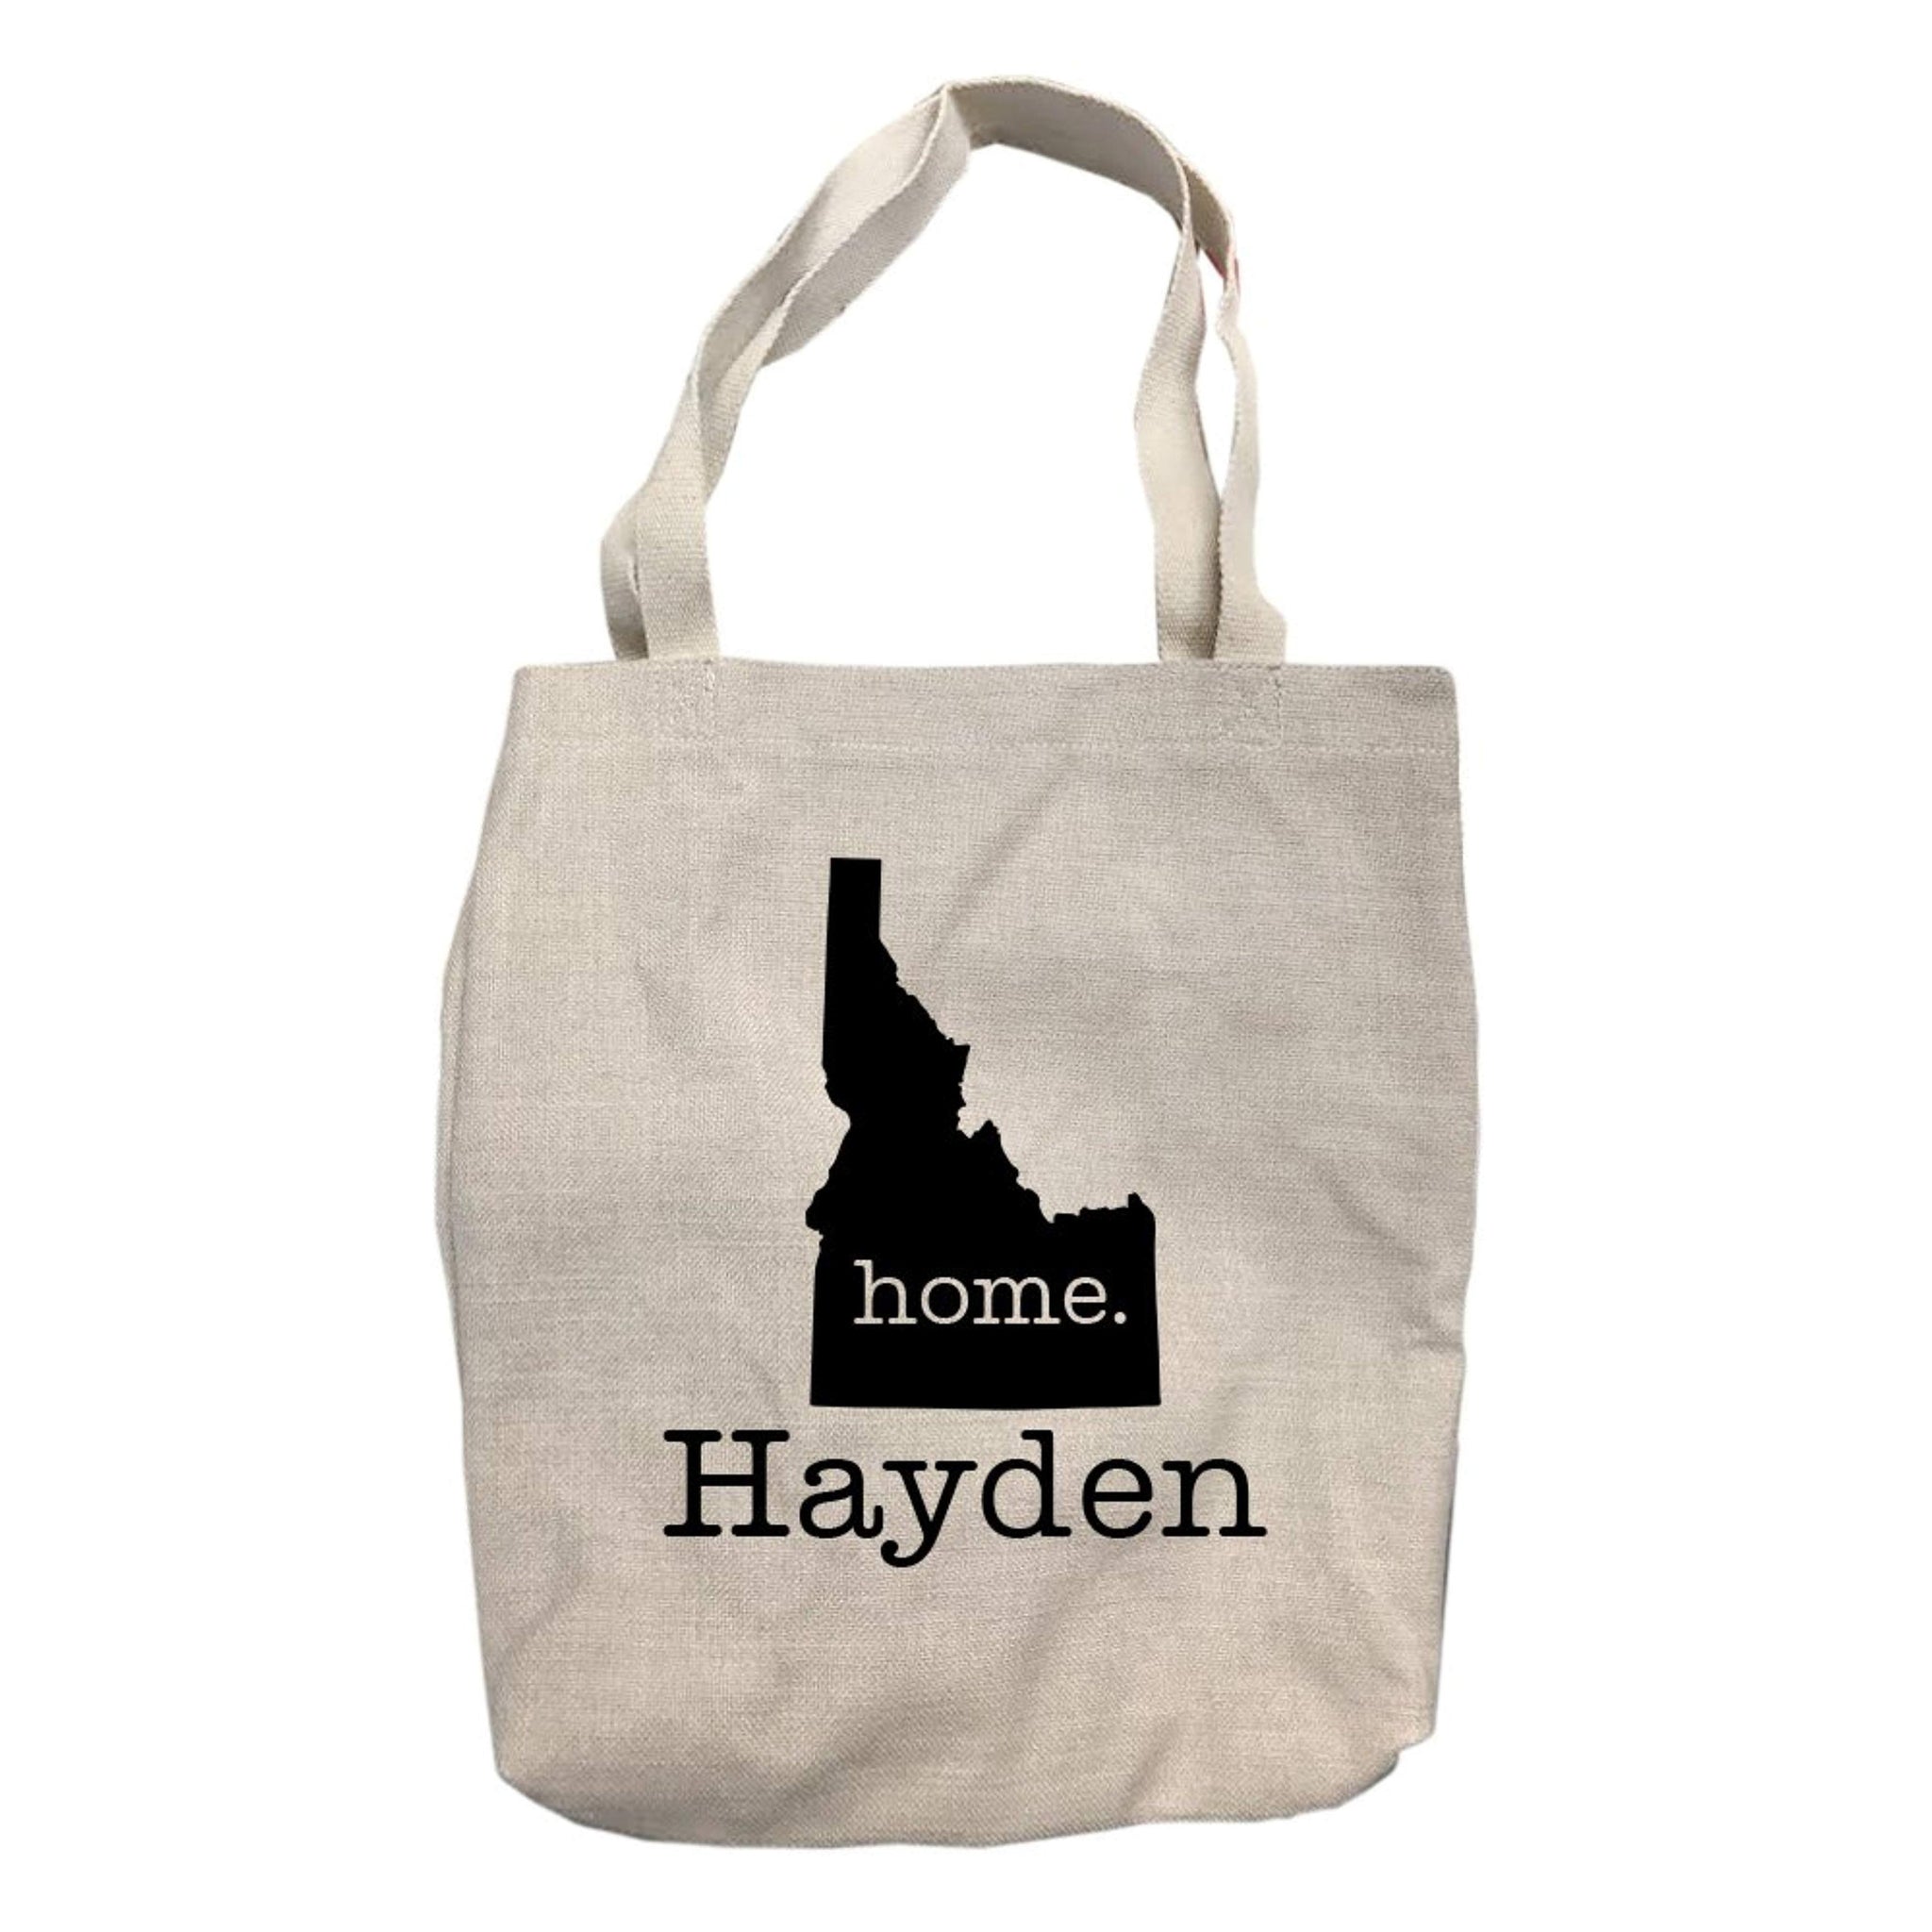 Personalized Idaho Home State Tote Bag